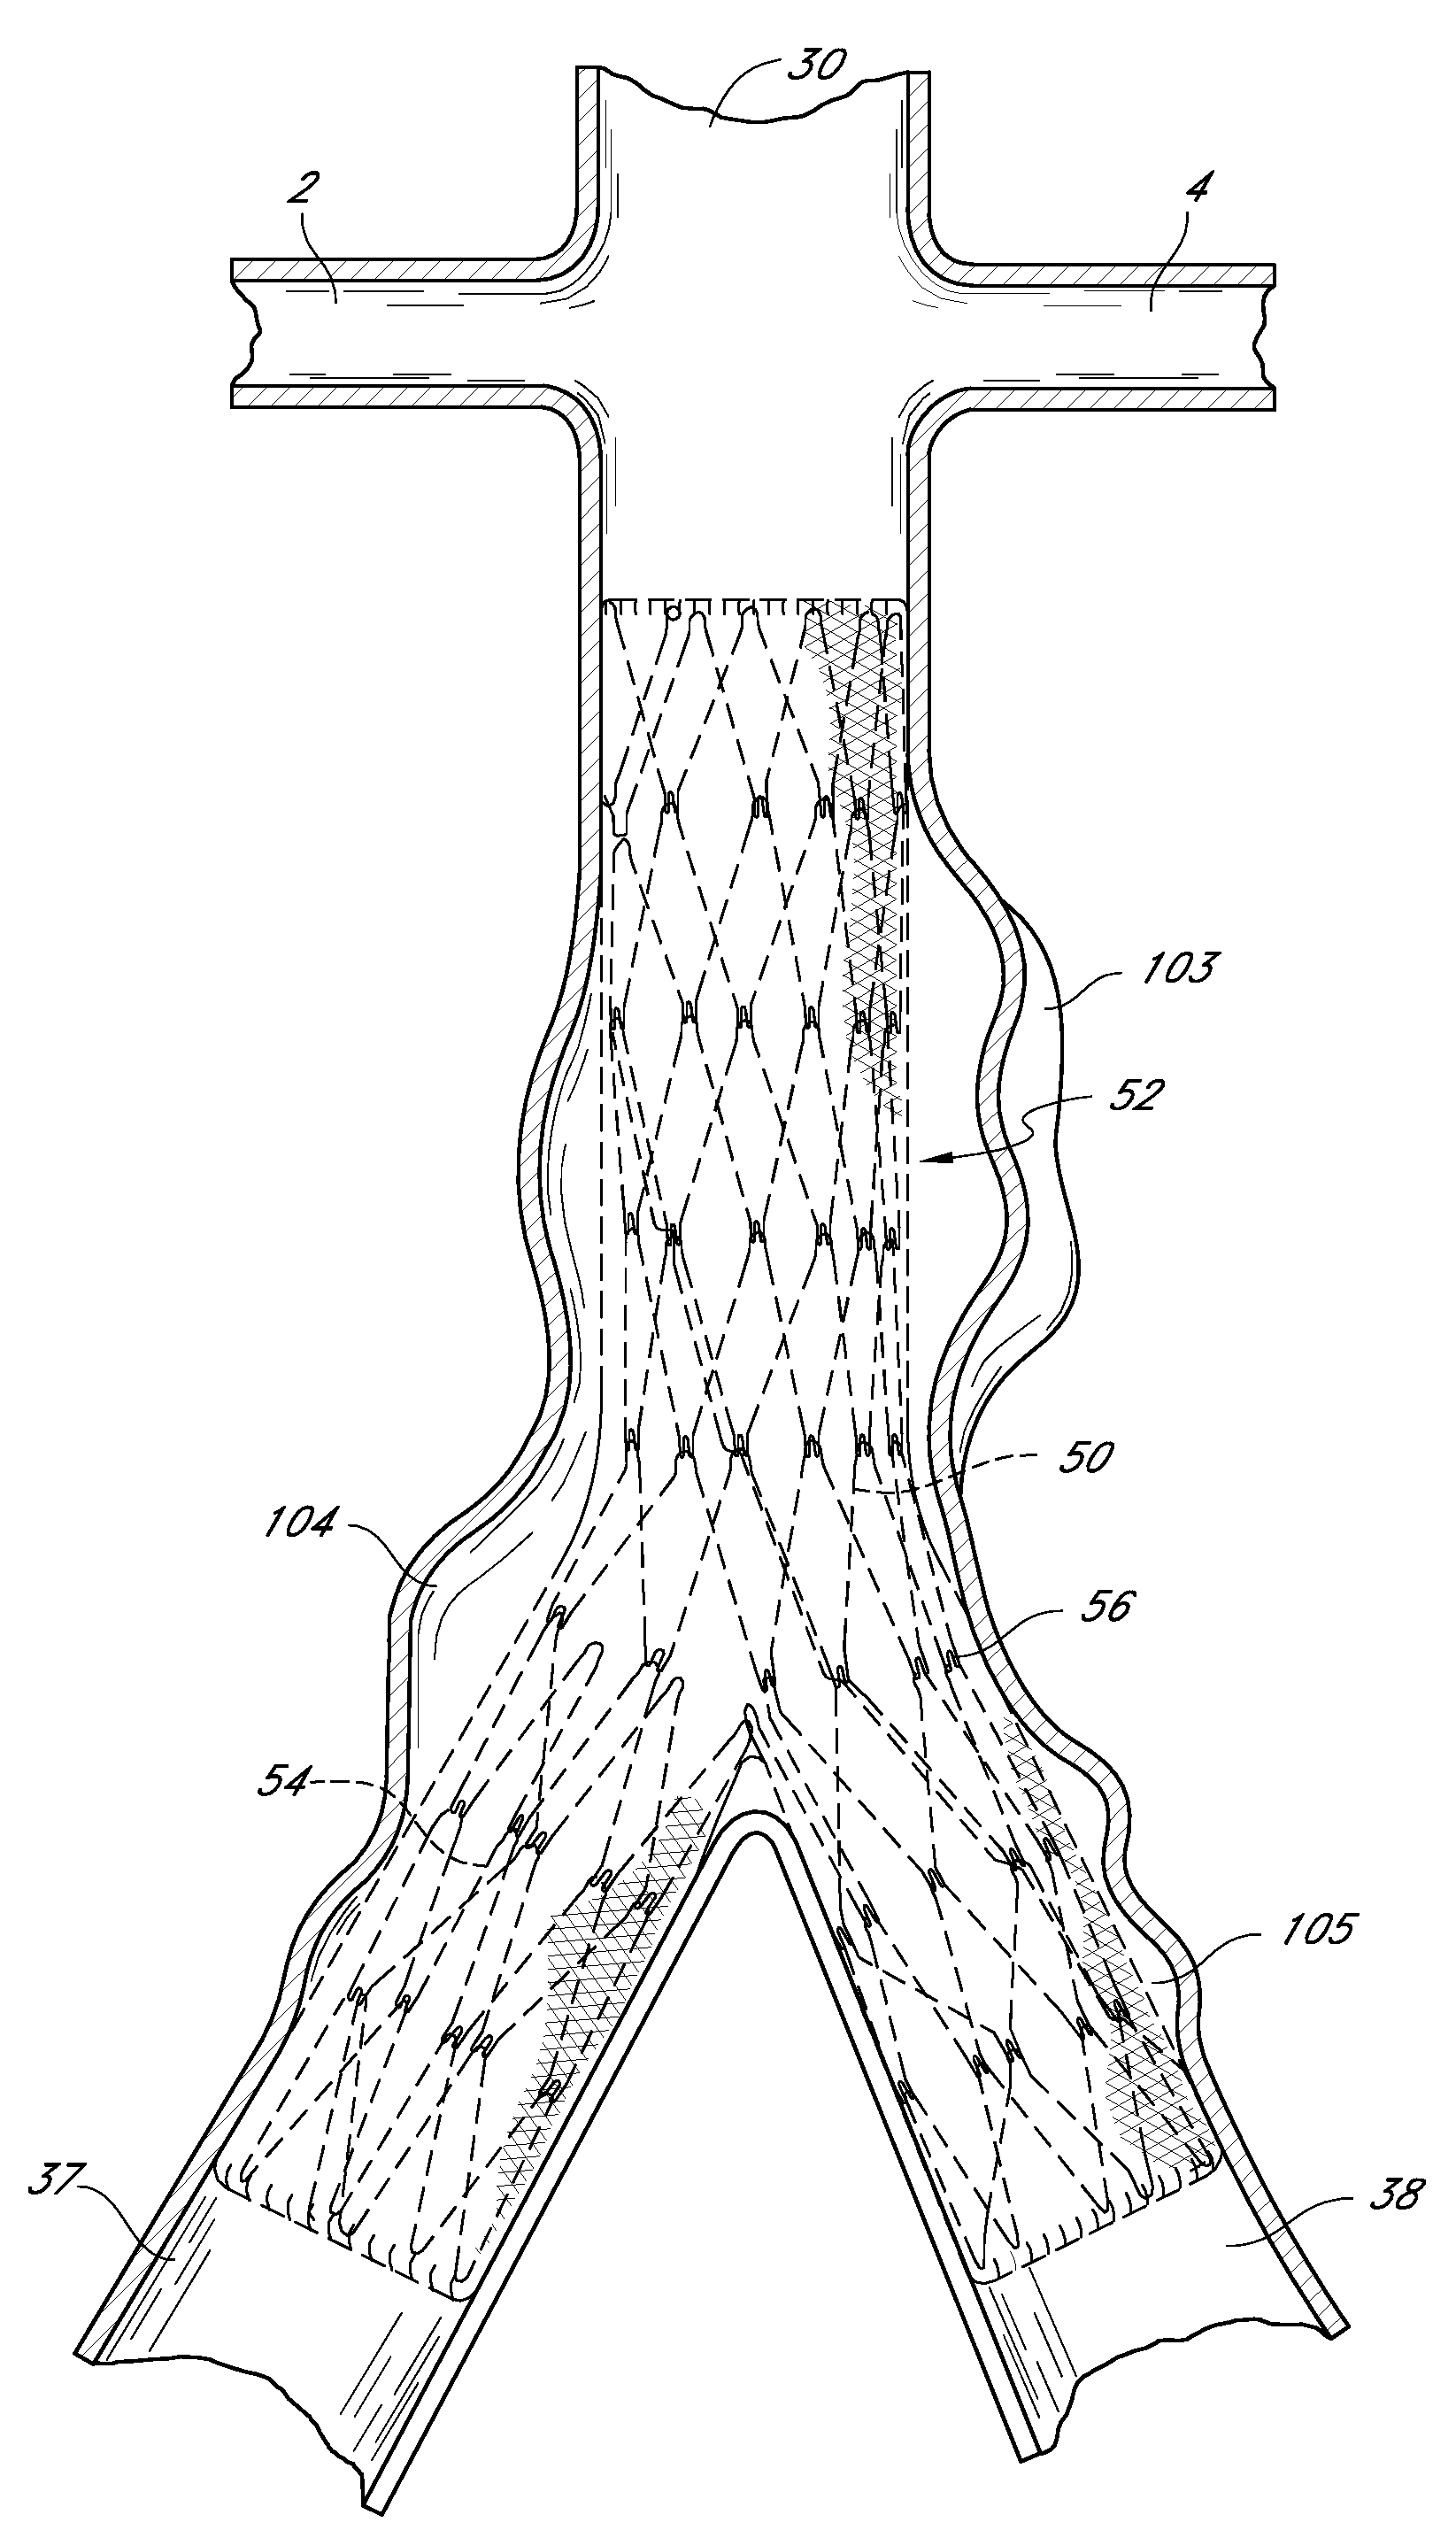 Bifurcated graft deployment systems and methods